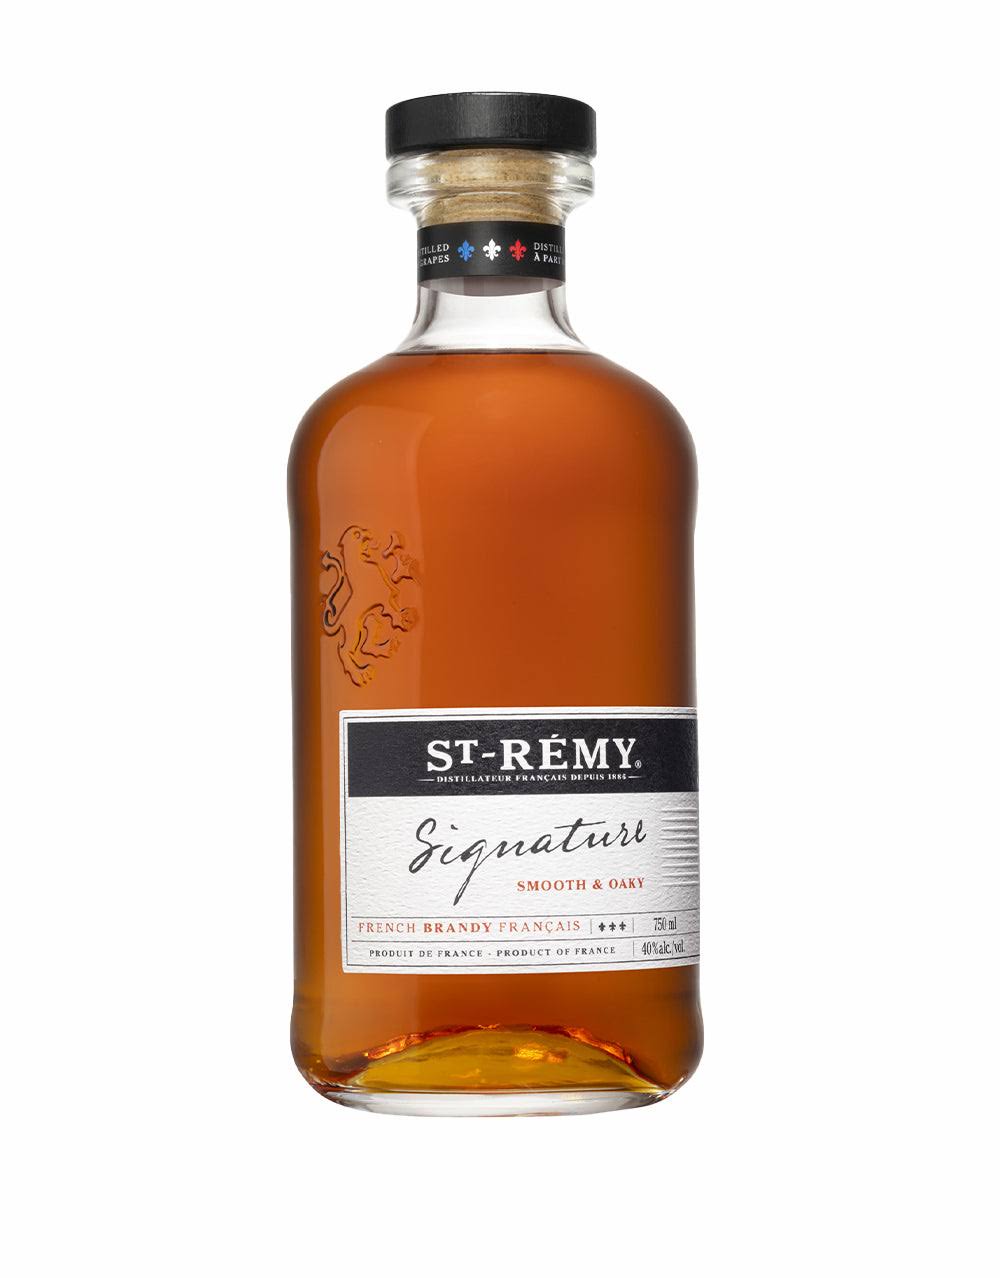 St-Remy Brandy, French, Smooth & Oaky - 750 ml